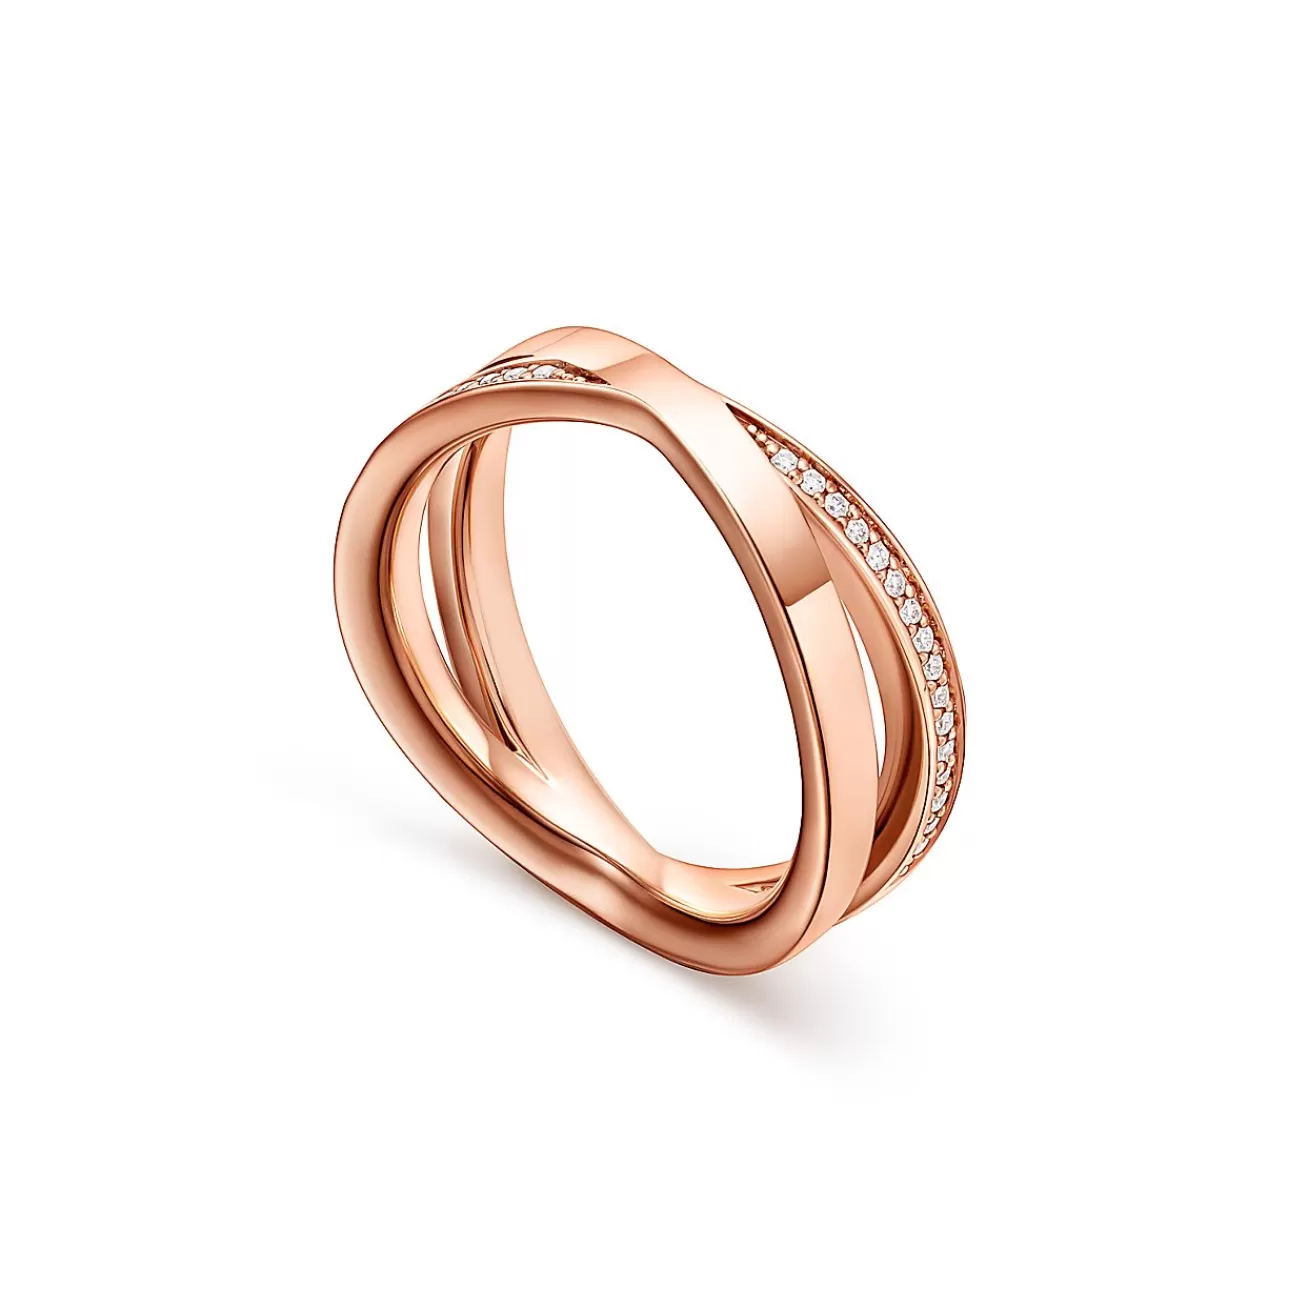 Tiffany & Co. Atlas® X Narrow Ring in Rose Gold with Diamonds | ^ Rings | Rose Gold Jewelry